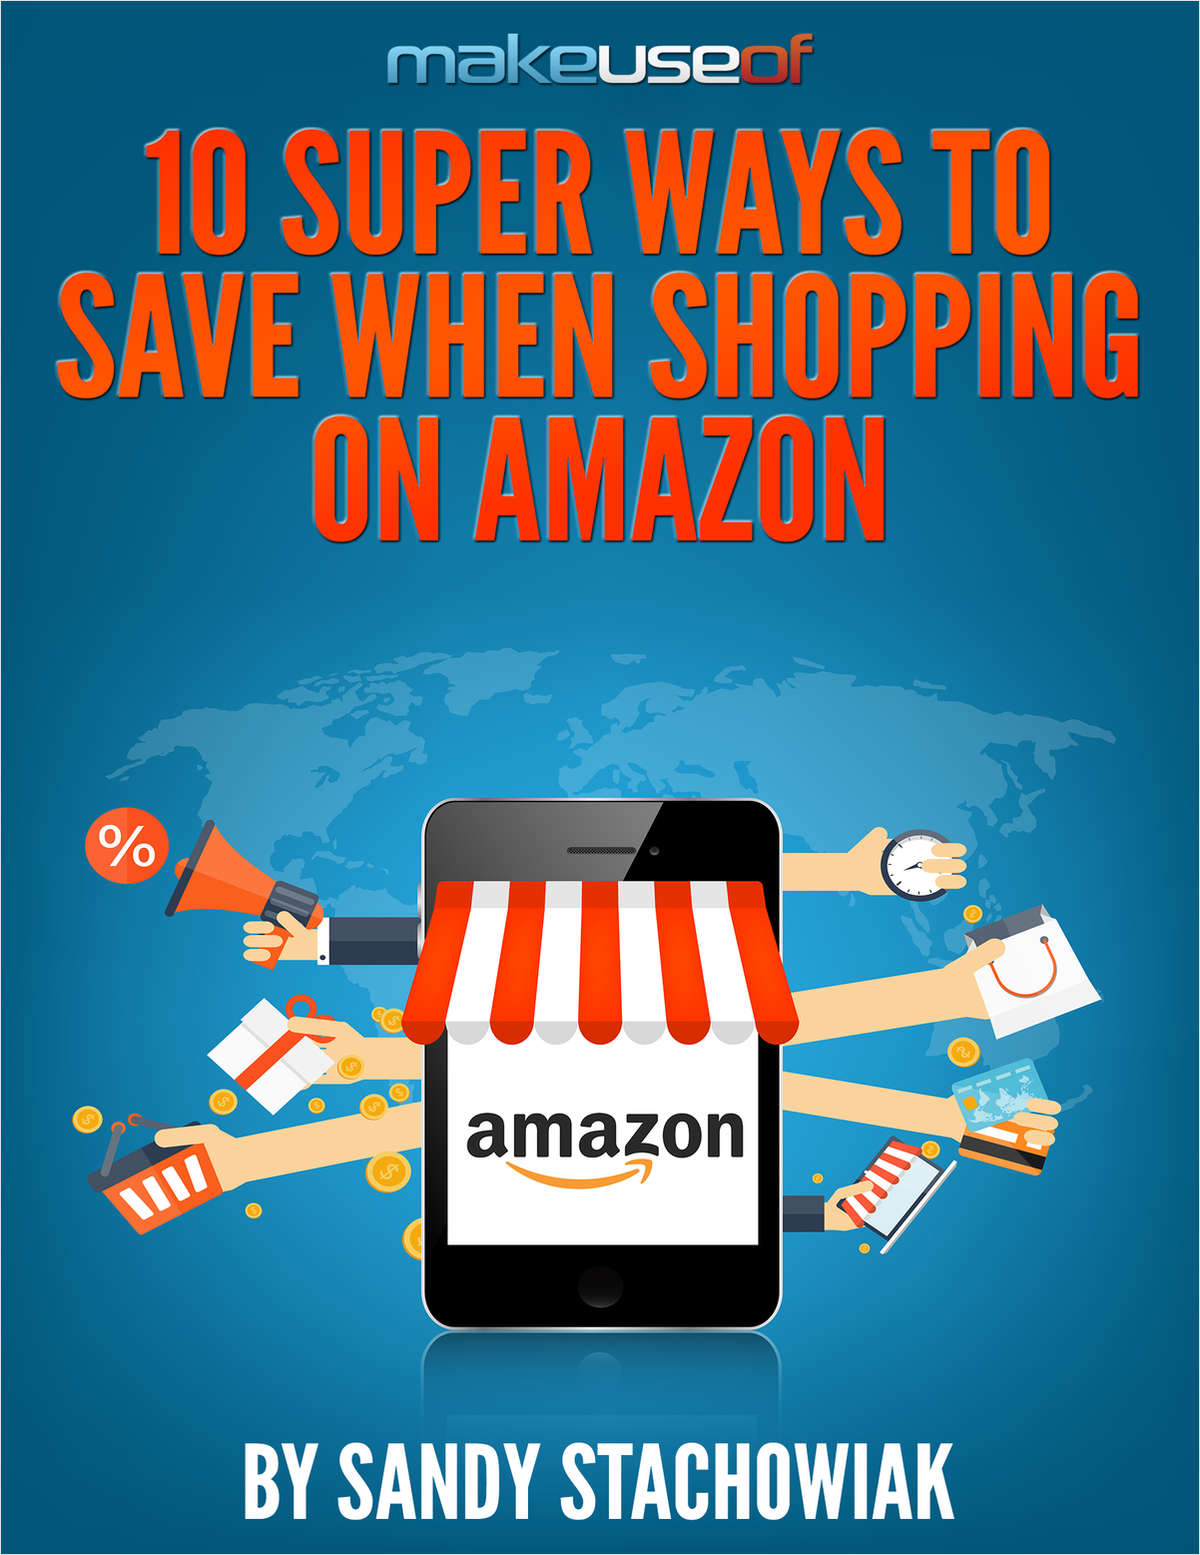 10 Super Ways to Save When Shopping on Amazon